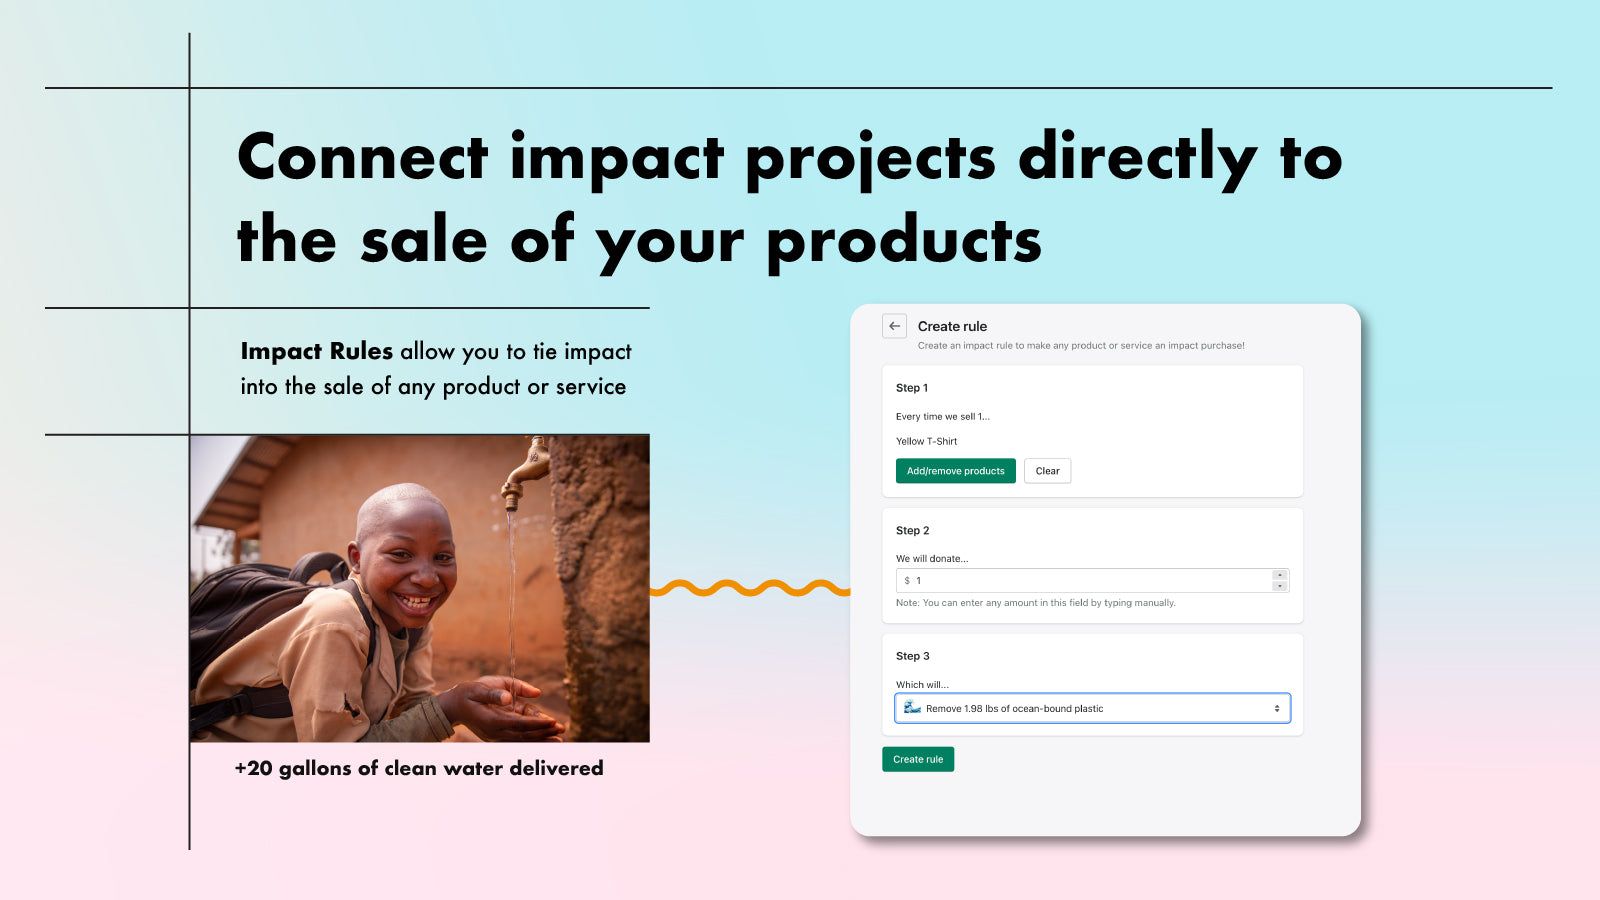 Connect impact projects directly to the sale of your products